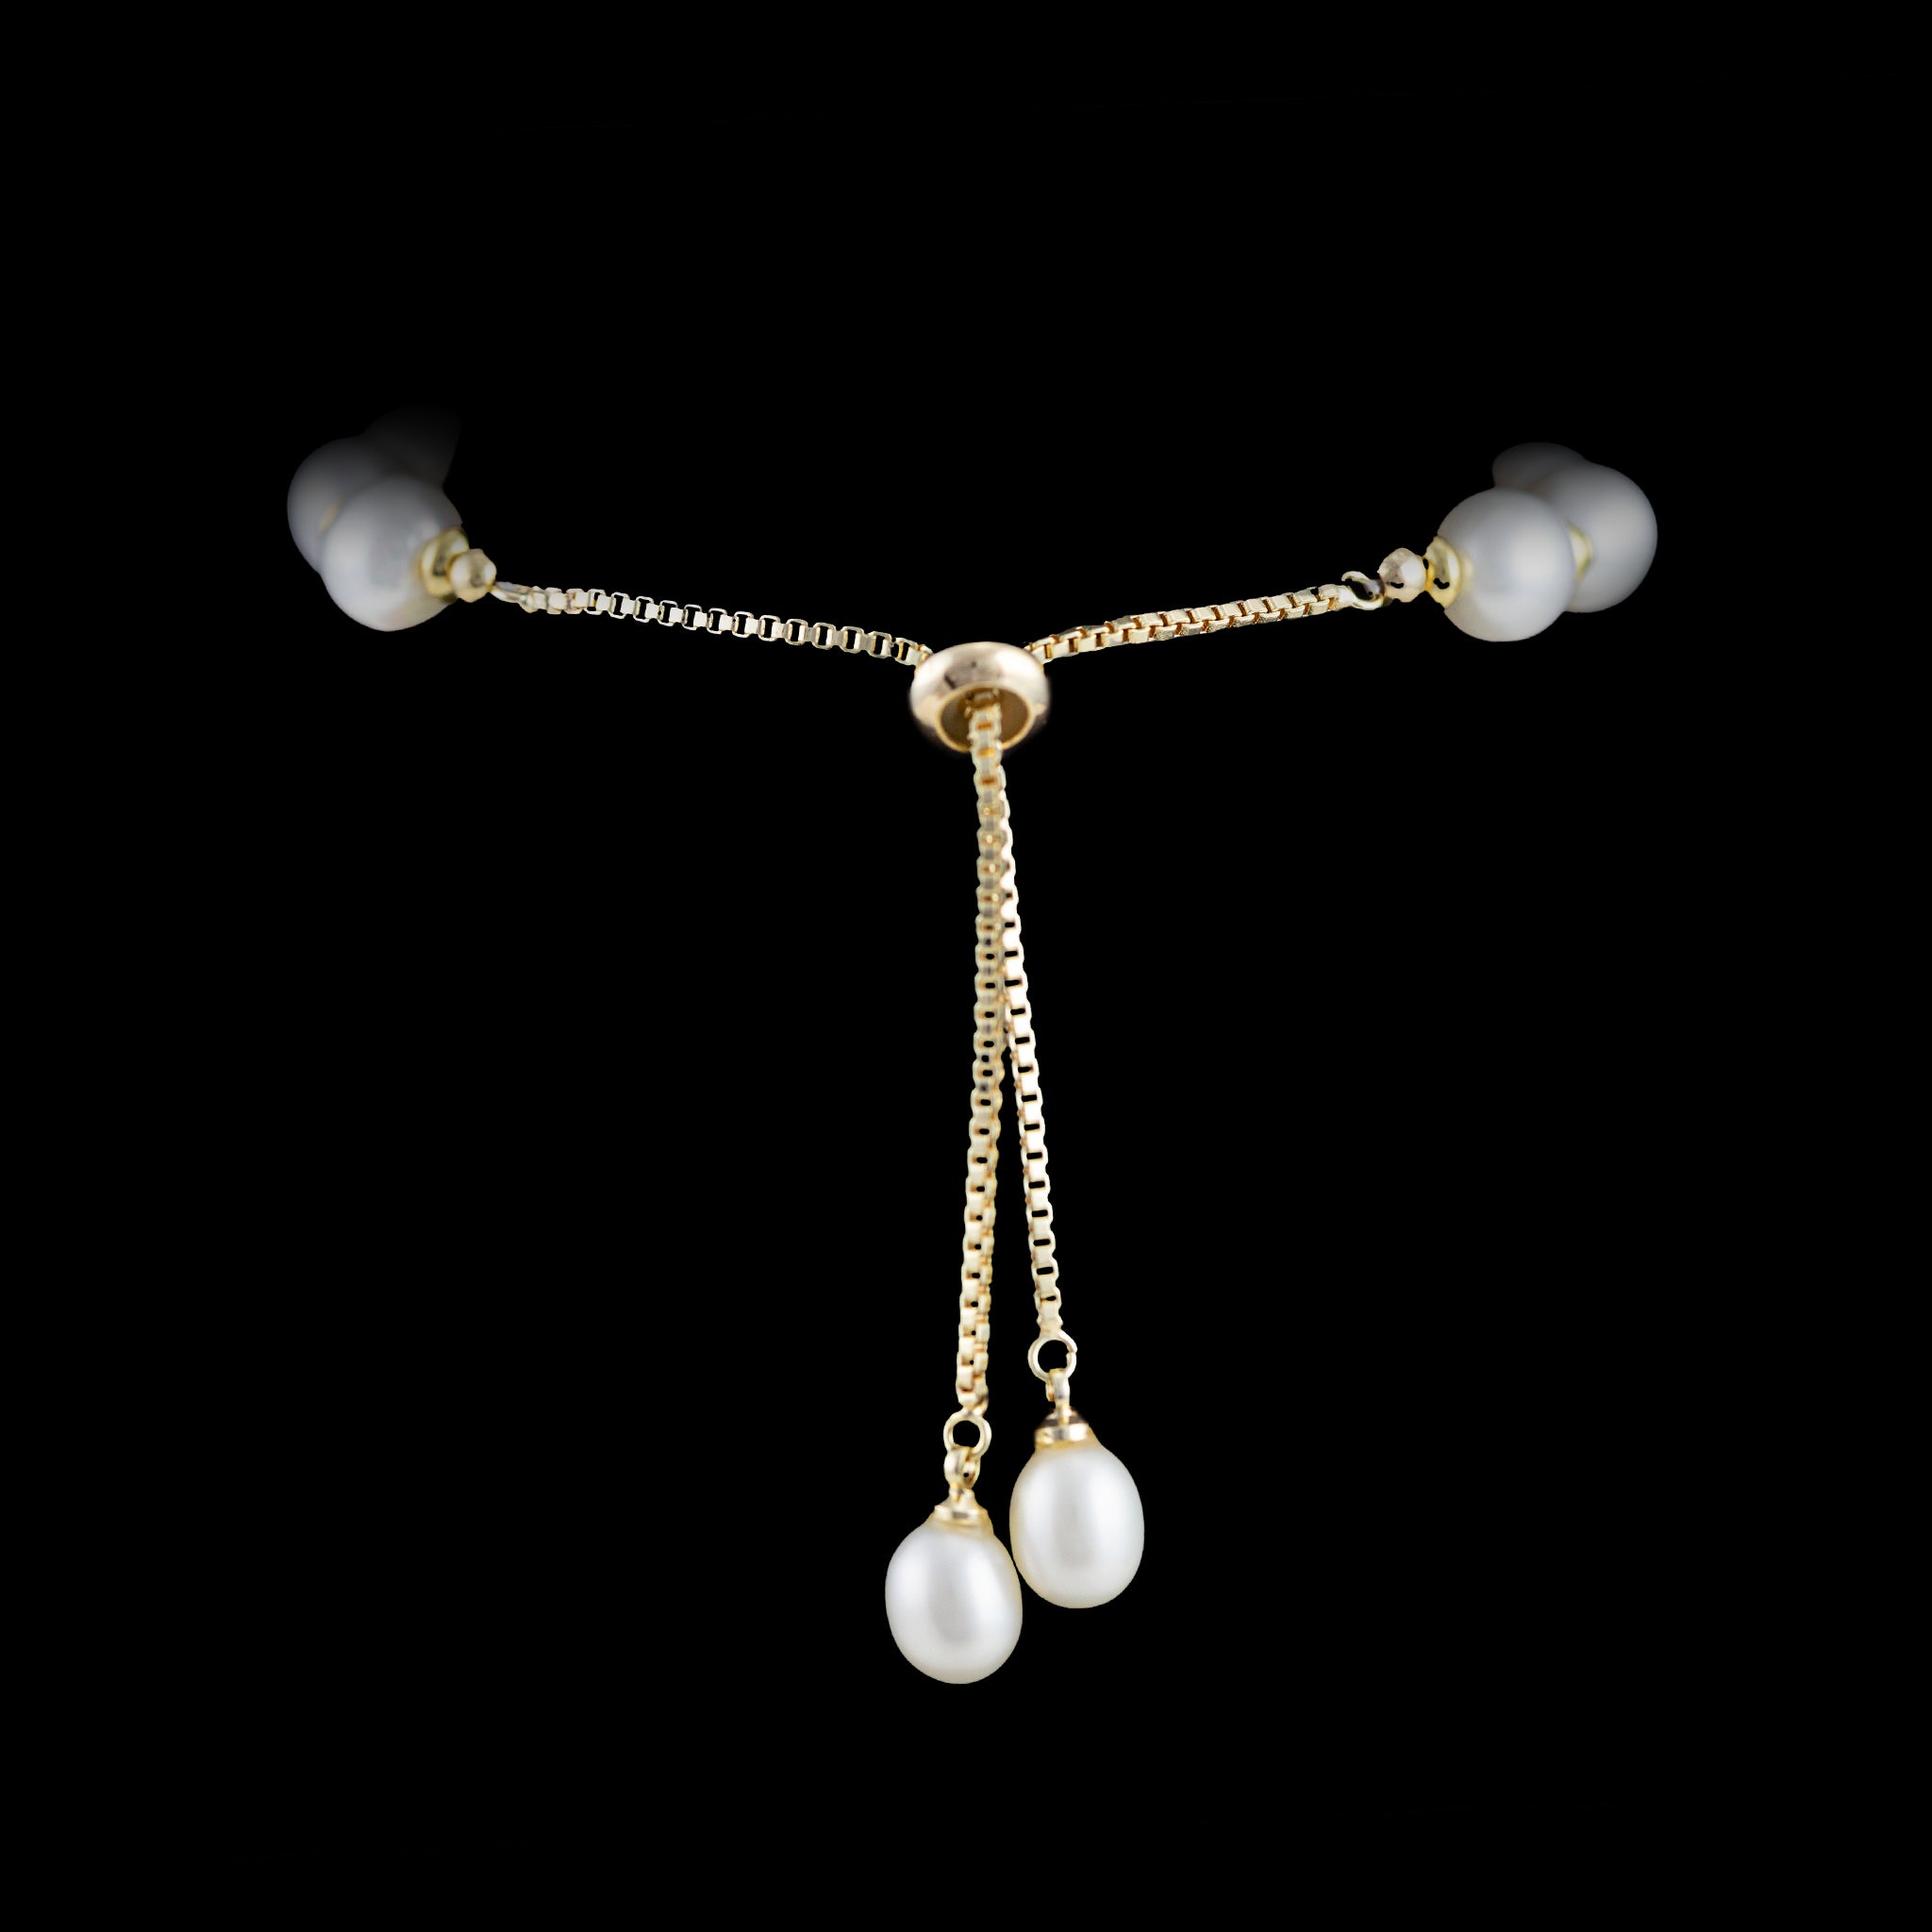 Freshwater Adjustable Pearl Bracelet in 14K Gold with Gemstone Charms - L'Amour Pearls